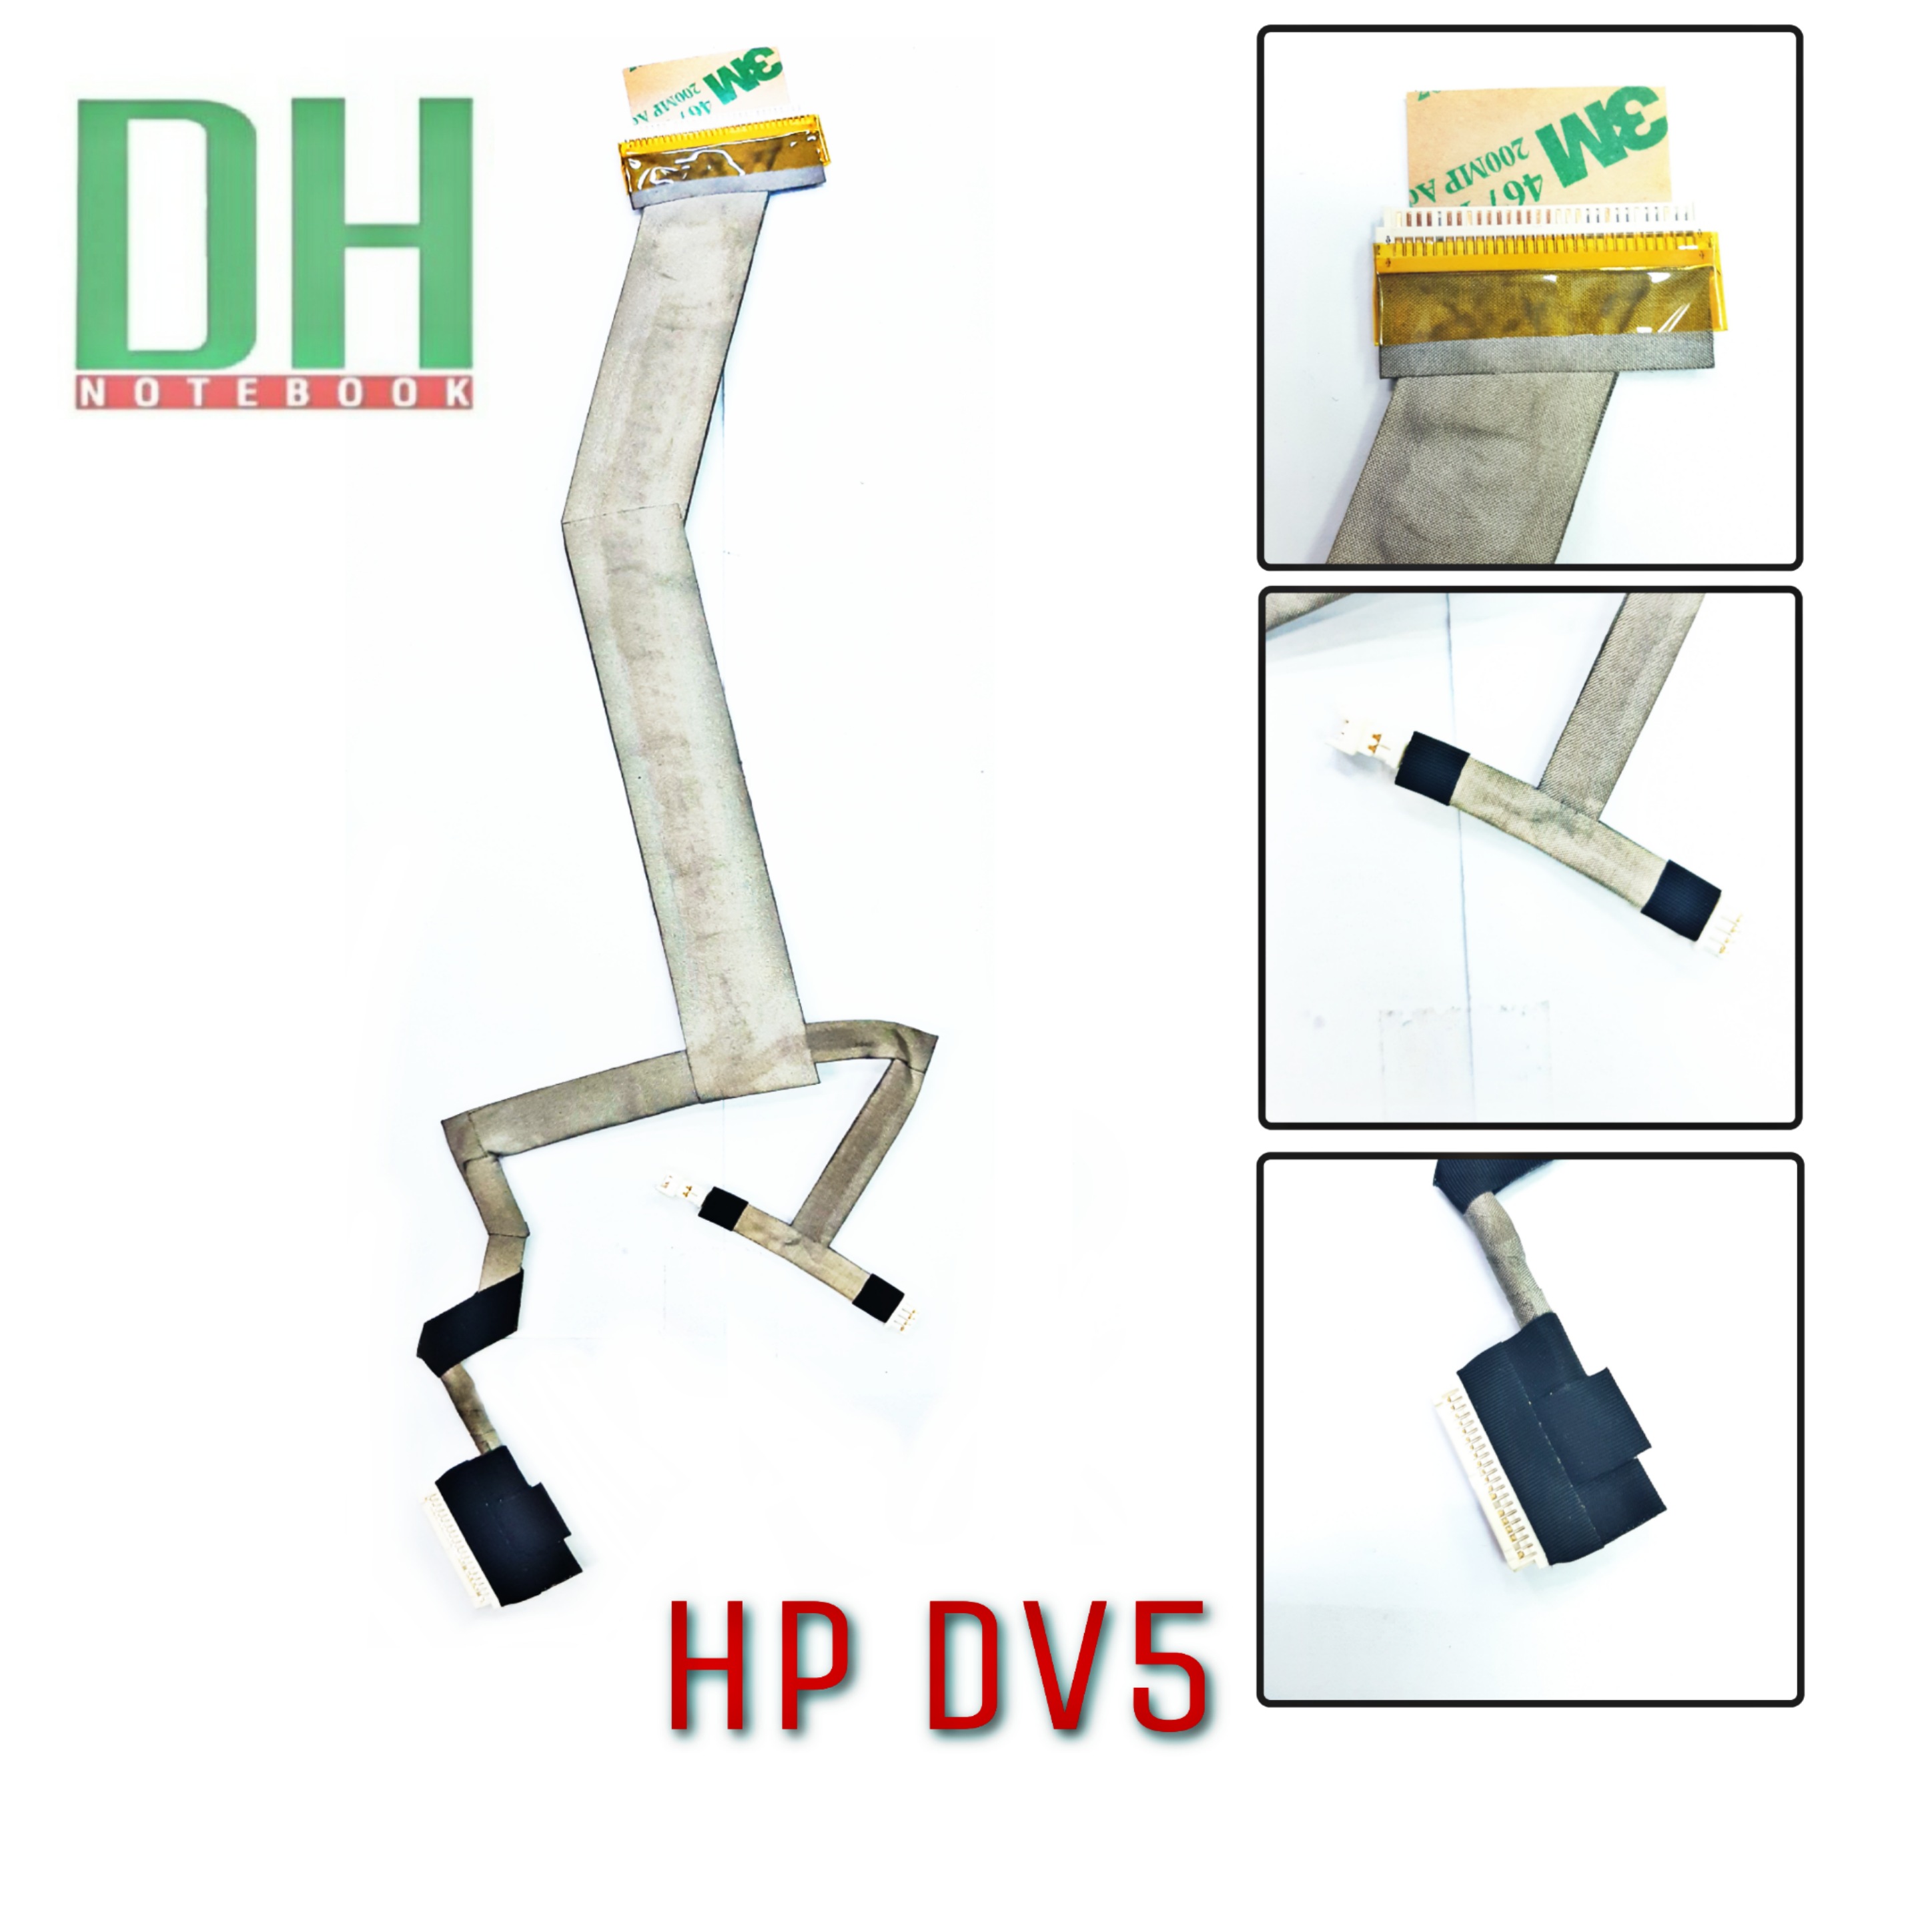 HP DV5 Video Cable